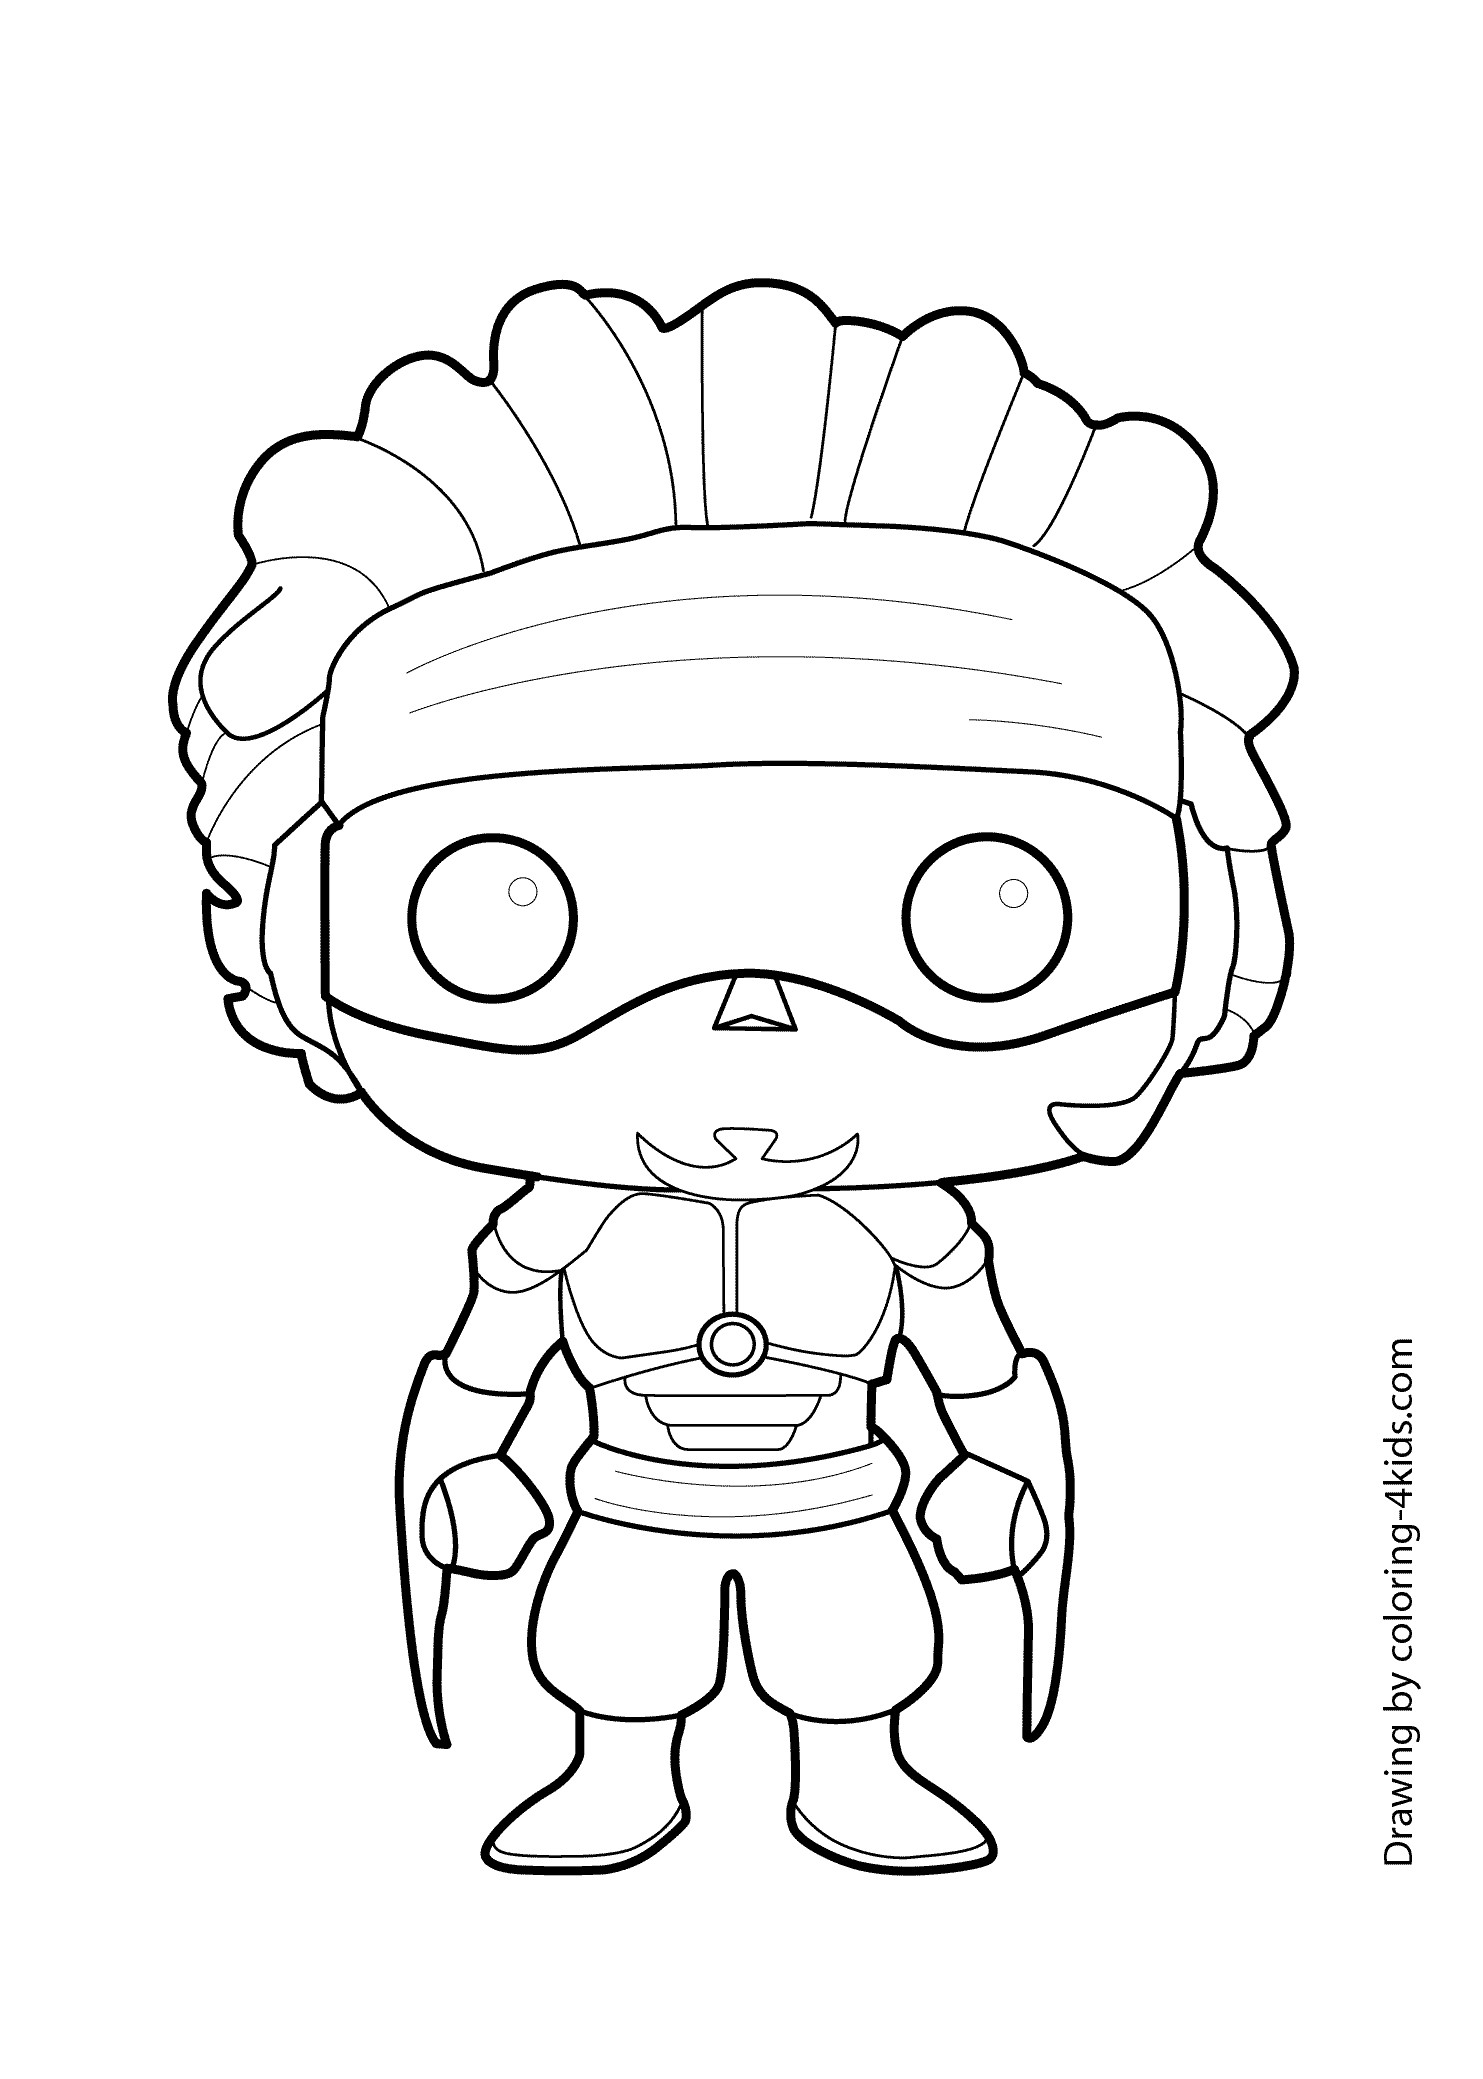 Coloring Pages For Big Boys
 Wasabi no Ginger hero boy coloring page for kids